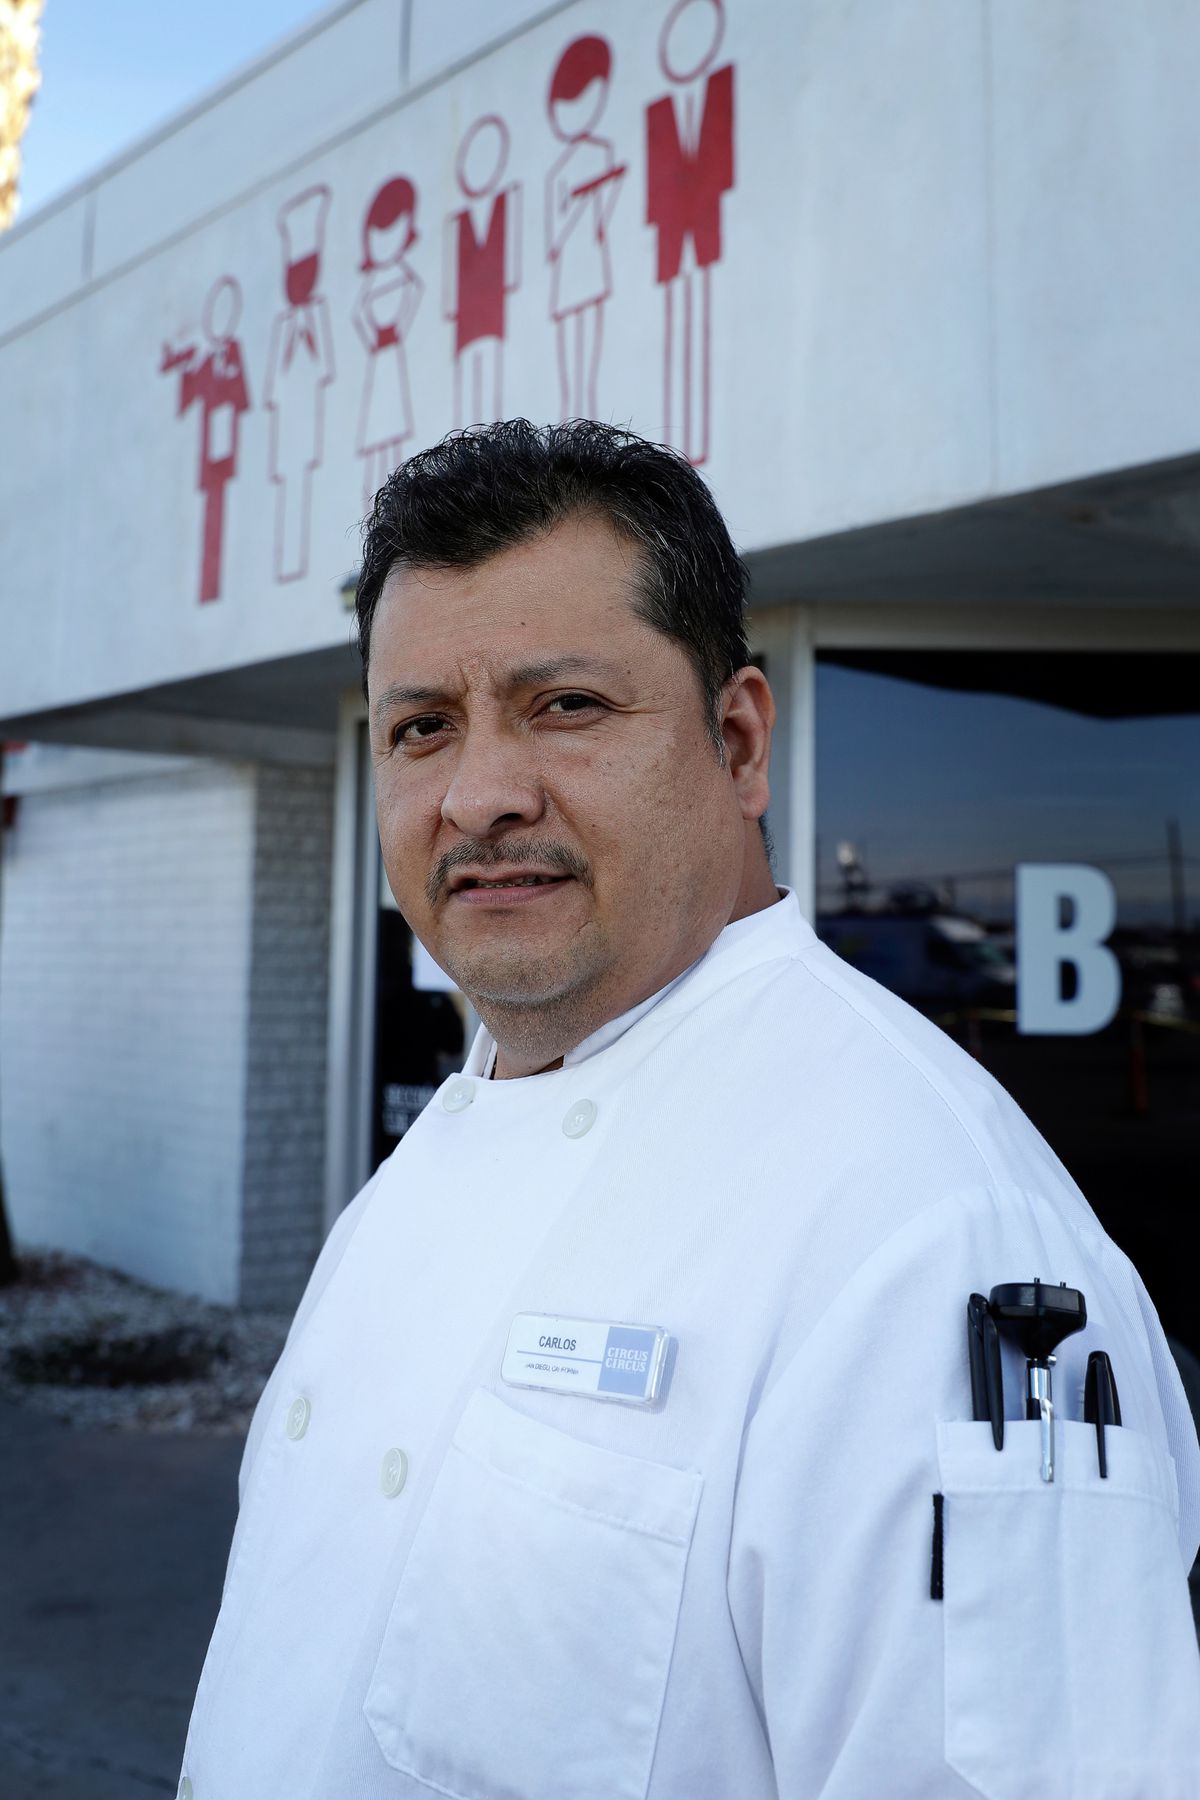 A man in a chef’s coat looks into the camera.